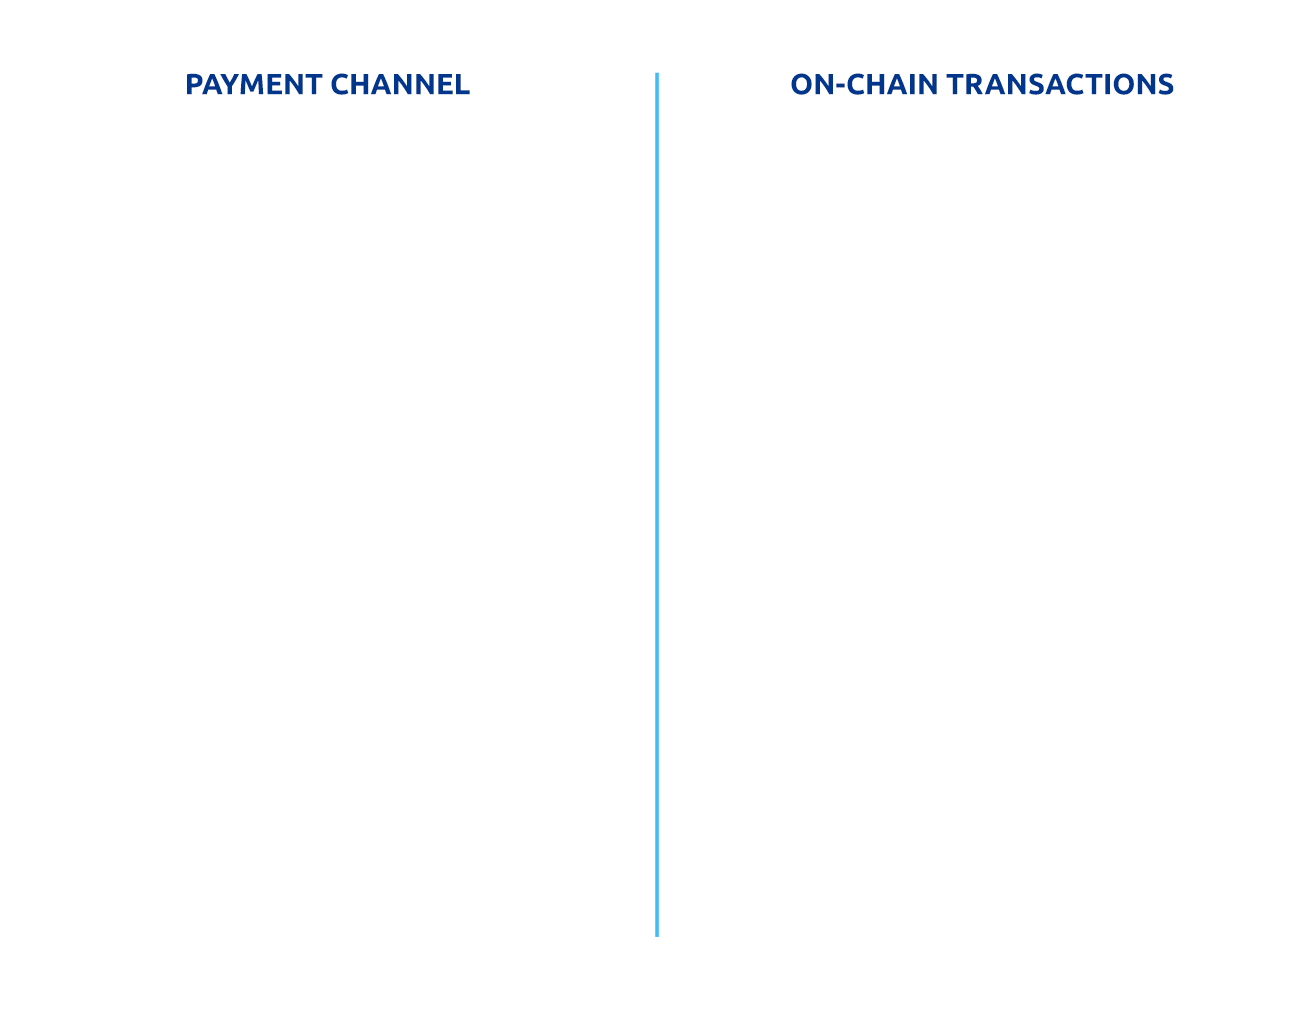 payment channel and on-chain transactions